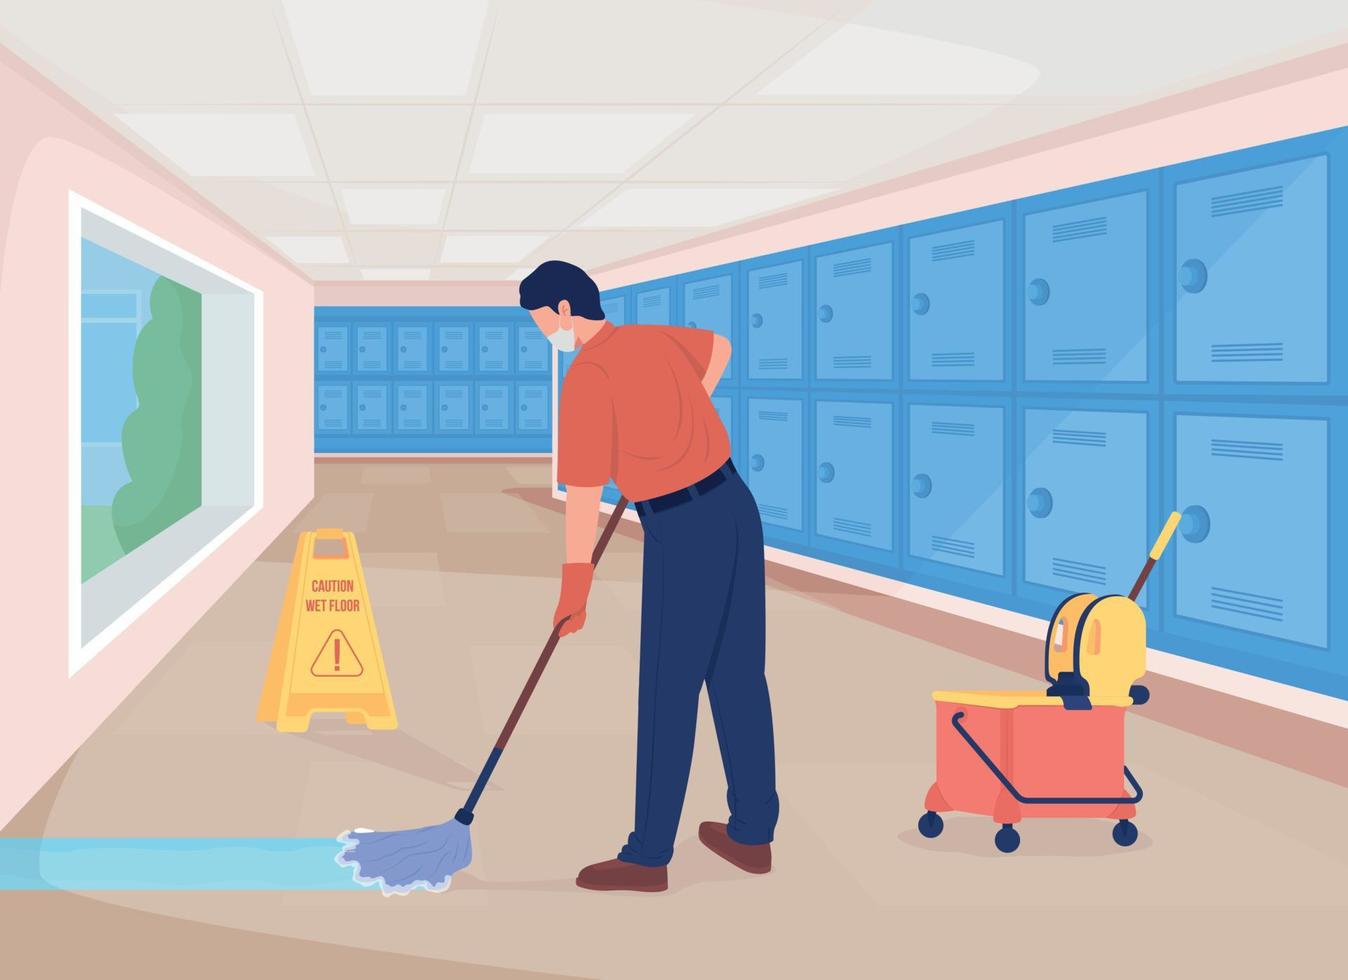 Cleaning school hall flat color vector illustration